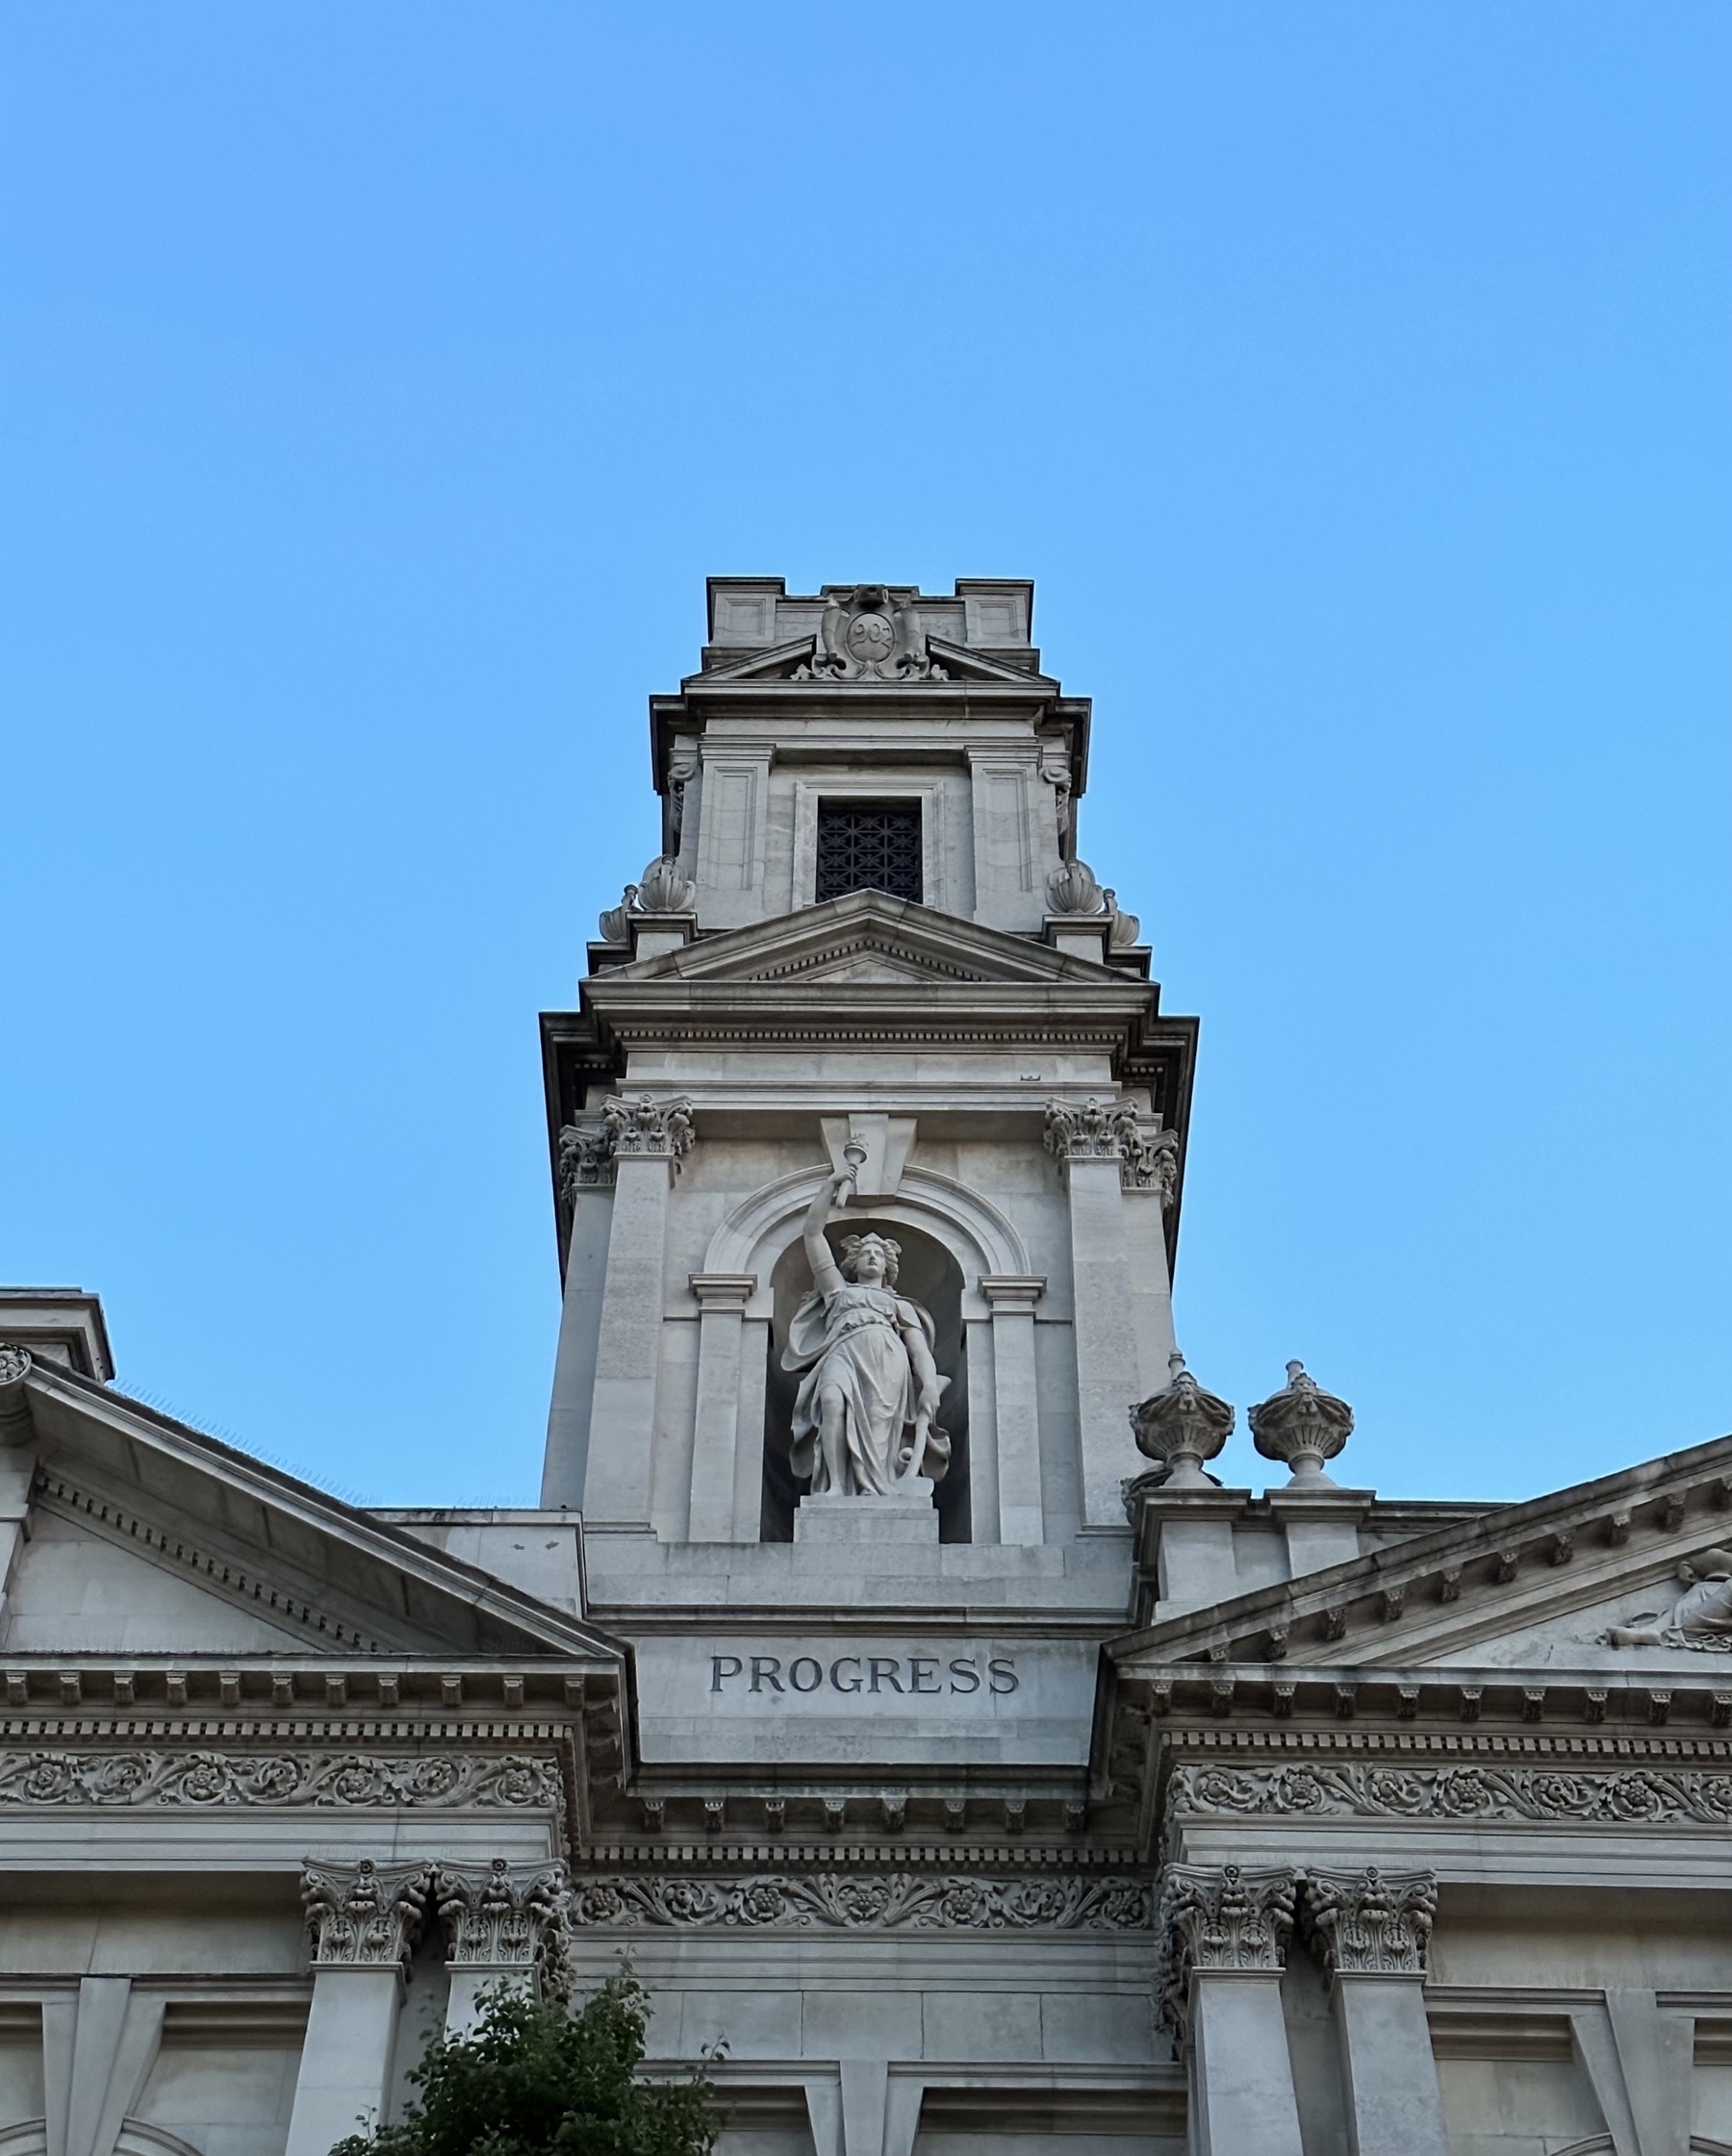 A stone building with a statue of a woman holding a torch and an axe, with the word progress underneath.